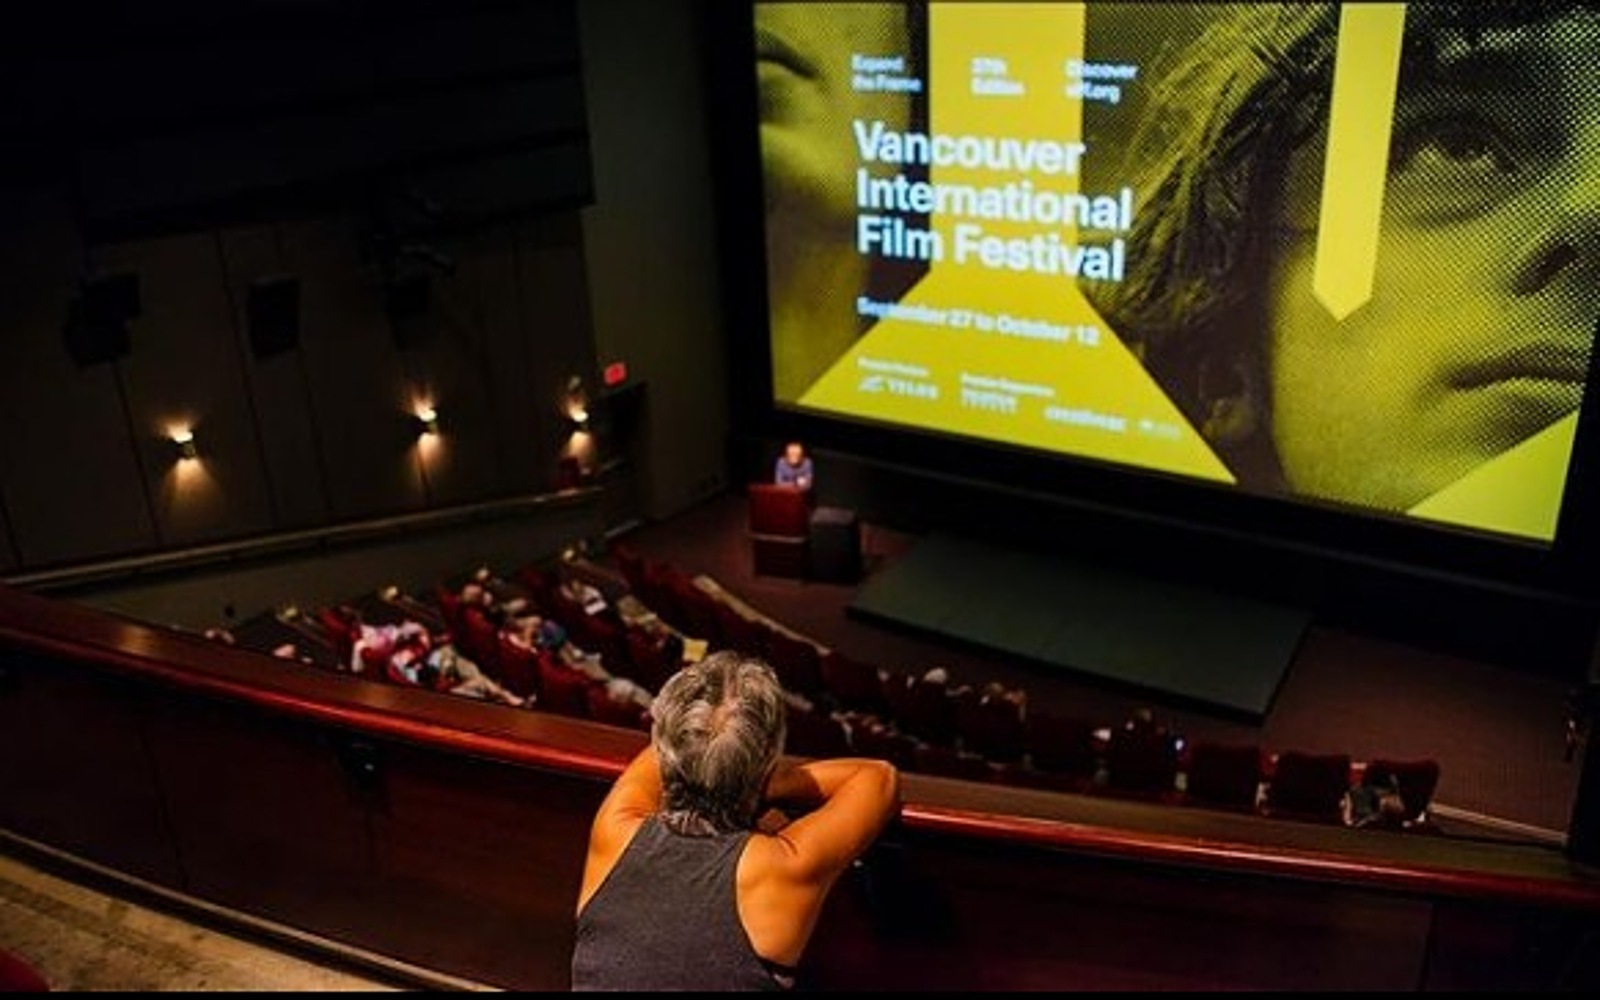 A women watches a film at the vancouver international Film festival